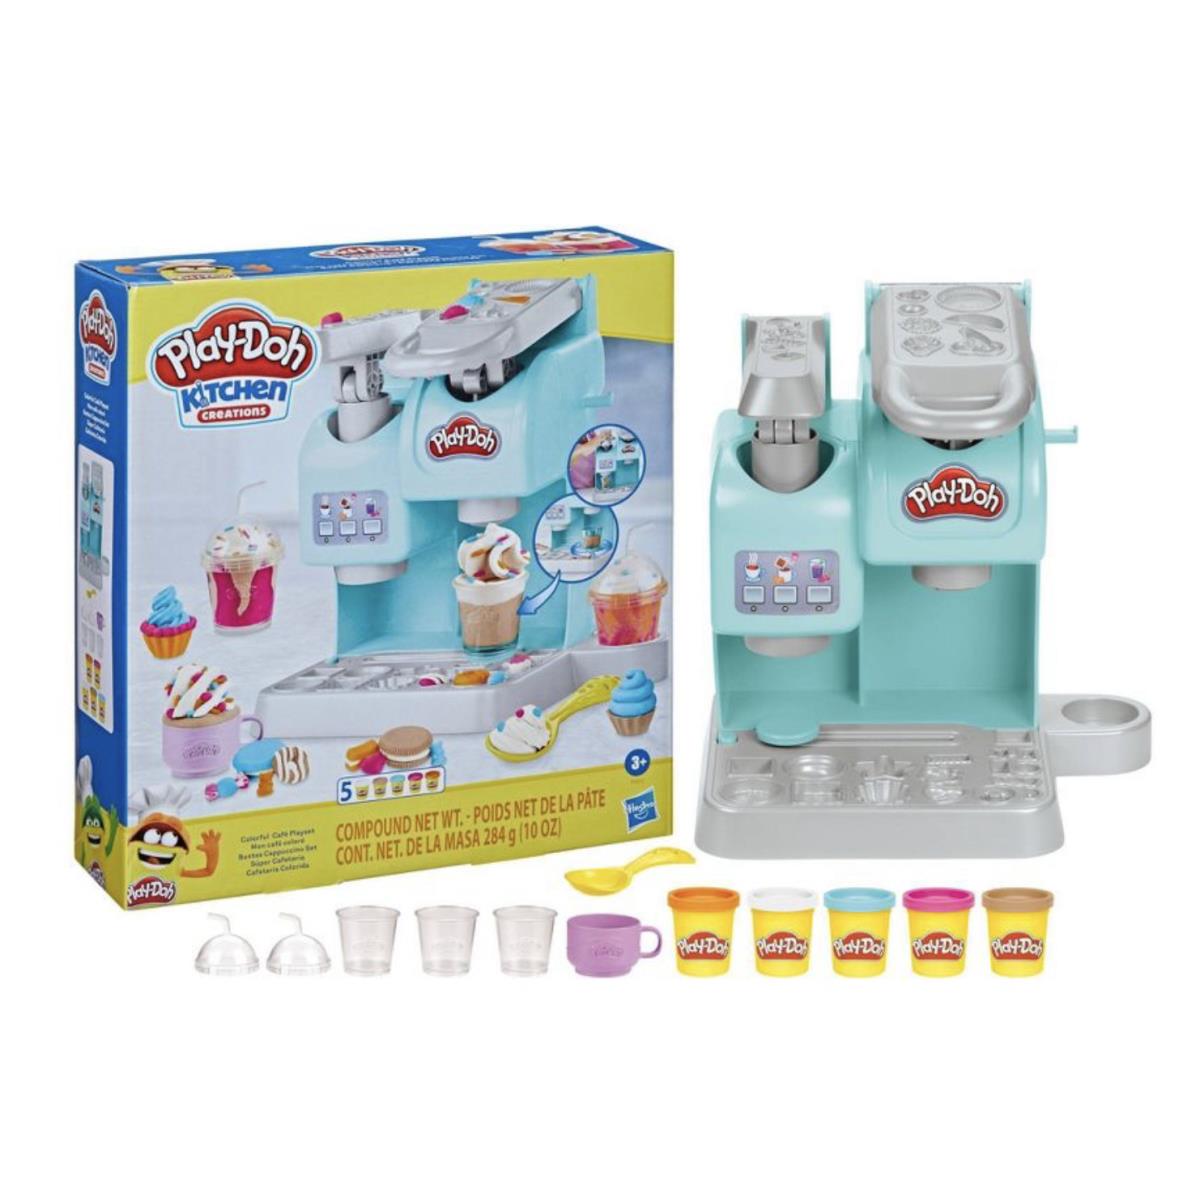 Play-doh Kitchen Creations Colorful Cafe Kids Kitchen Playset Toy